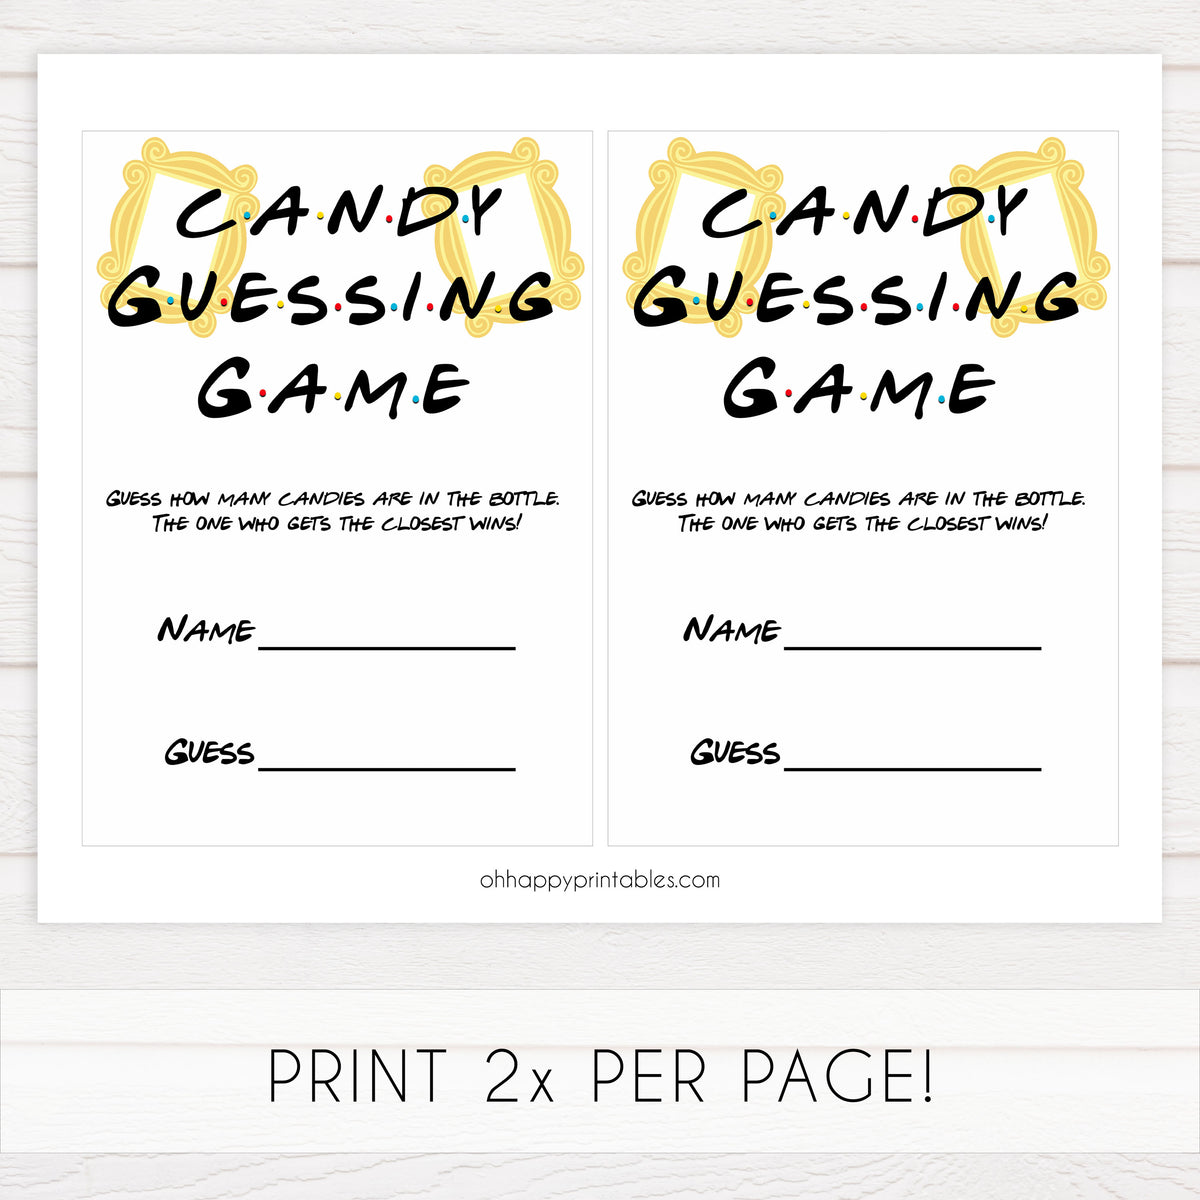 Candy Guessing Game Free Printable